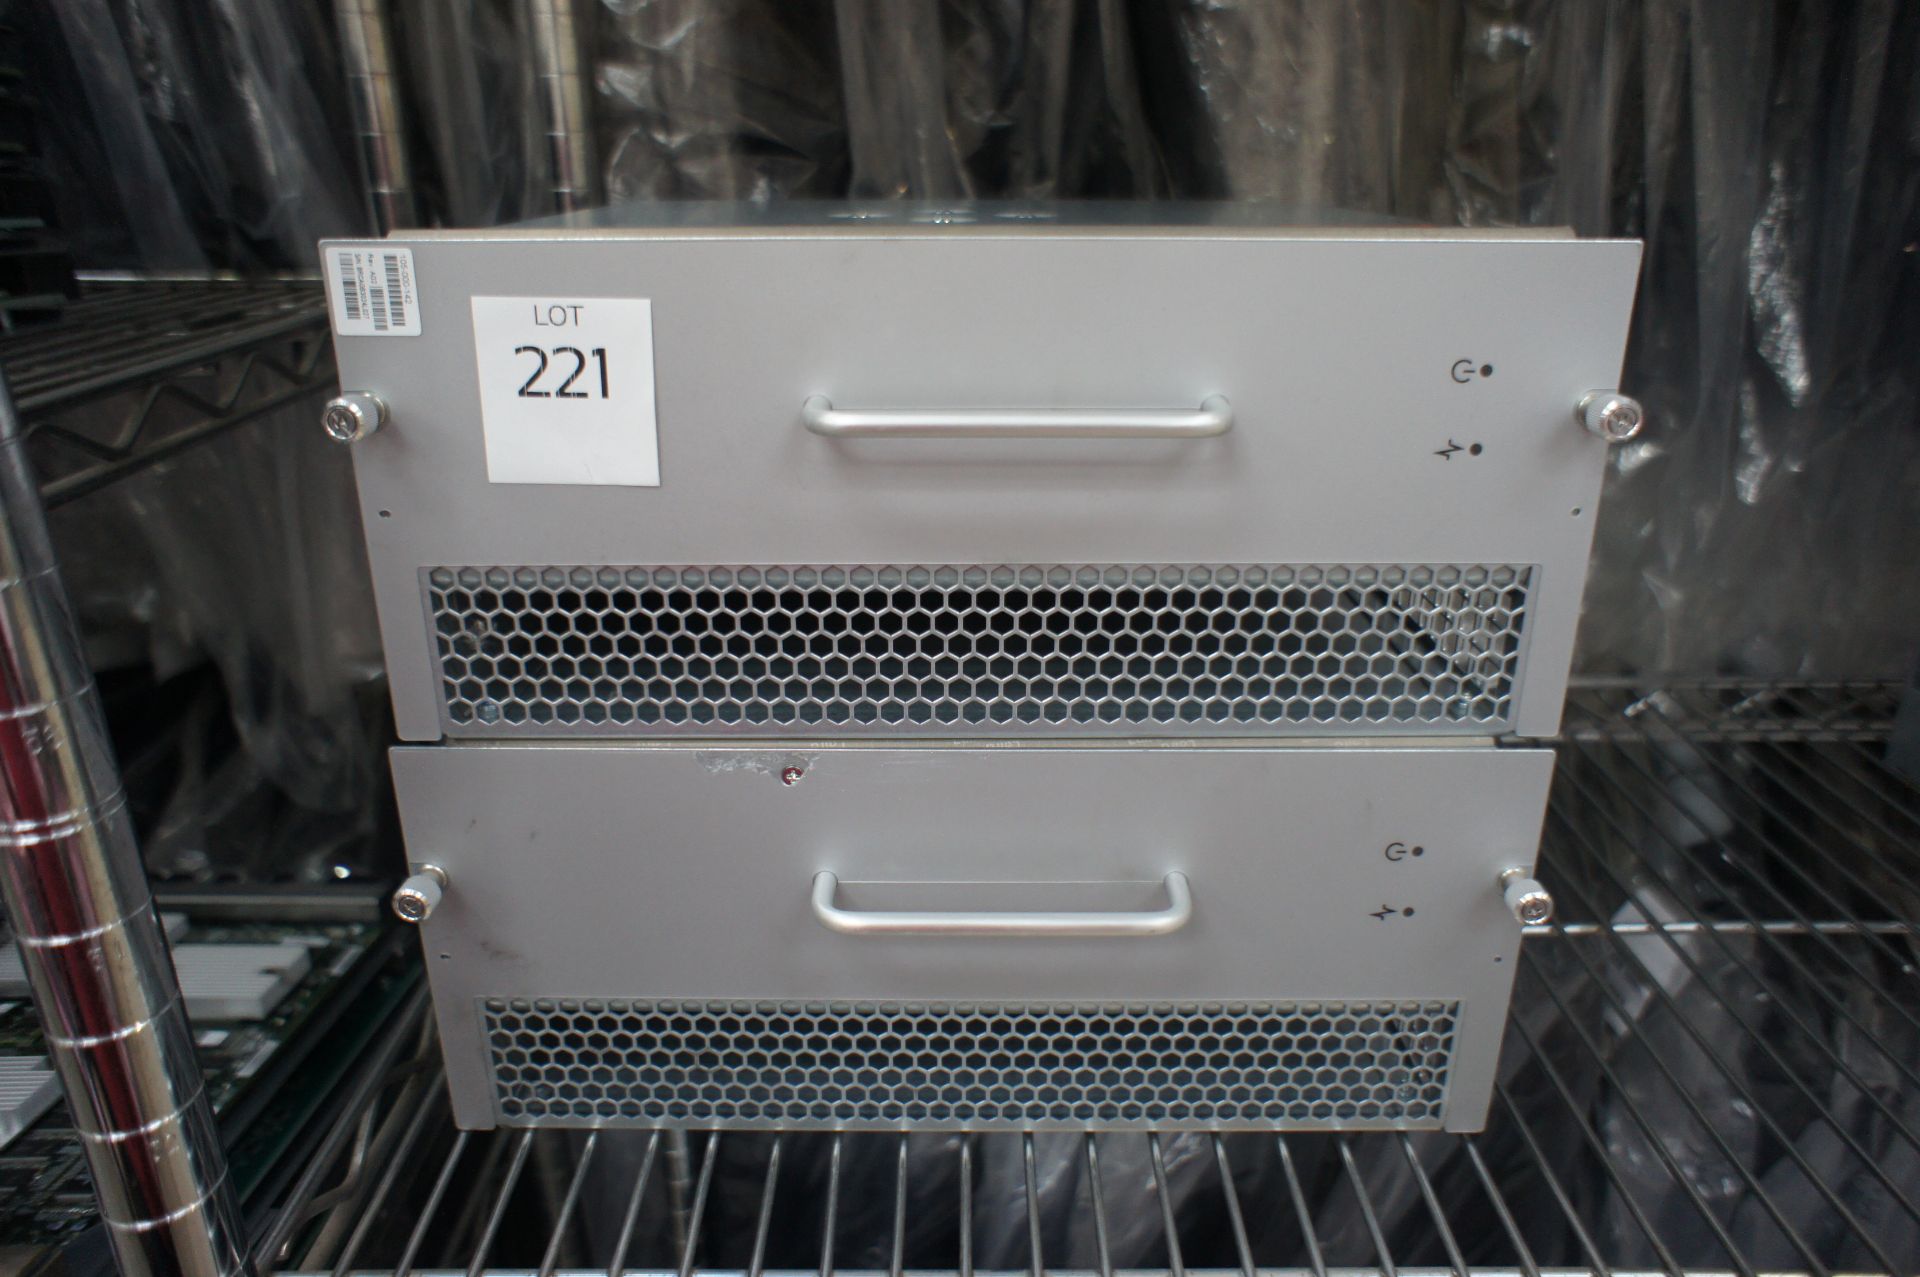 2 CNT EDGE extention unit, EDGE EXTENTION, 2 x Brocade 2109-S16 Switch, FIBRE SWITCH, 1 x Brocade - Image 17 of 31